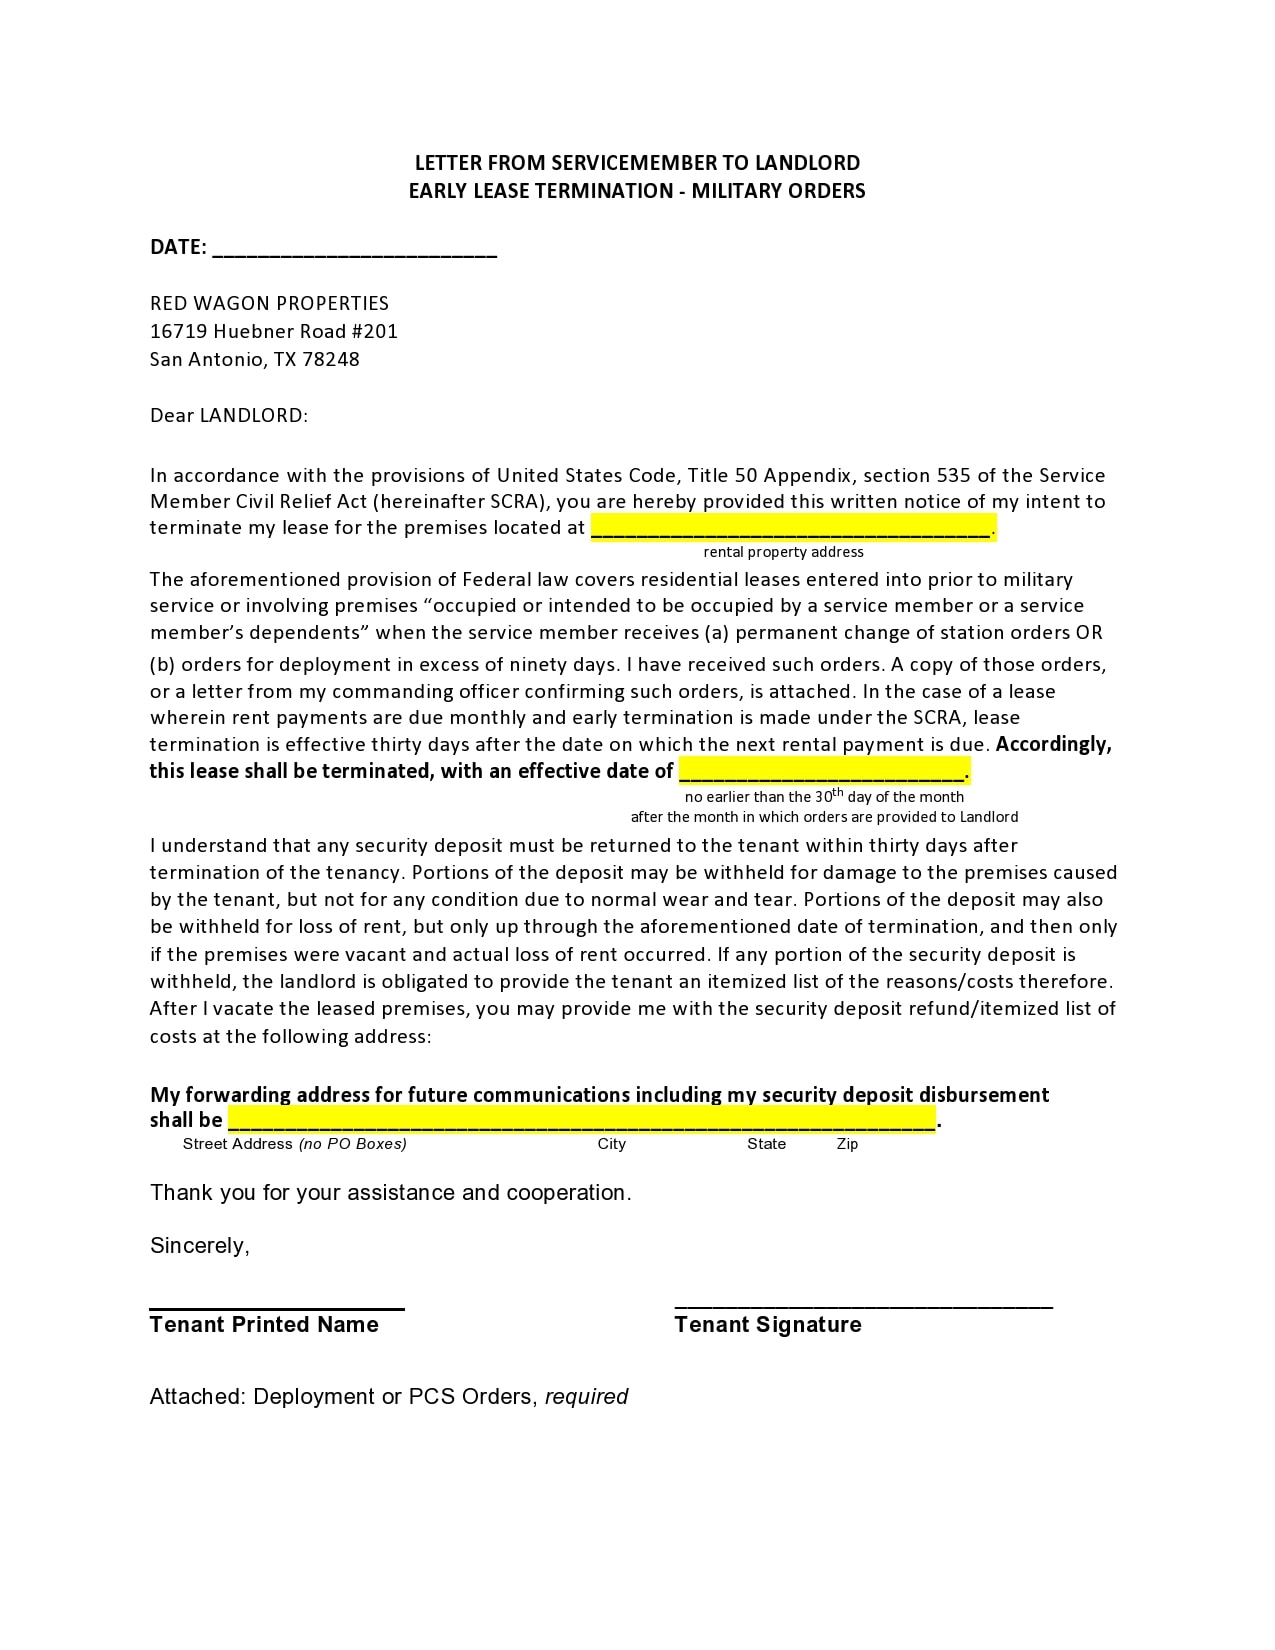 Early Apartment Lease Termination Letter from templatearchive.com